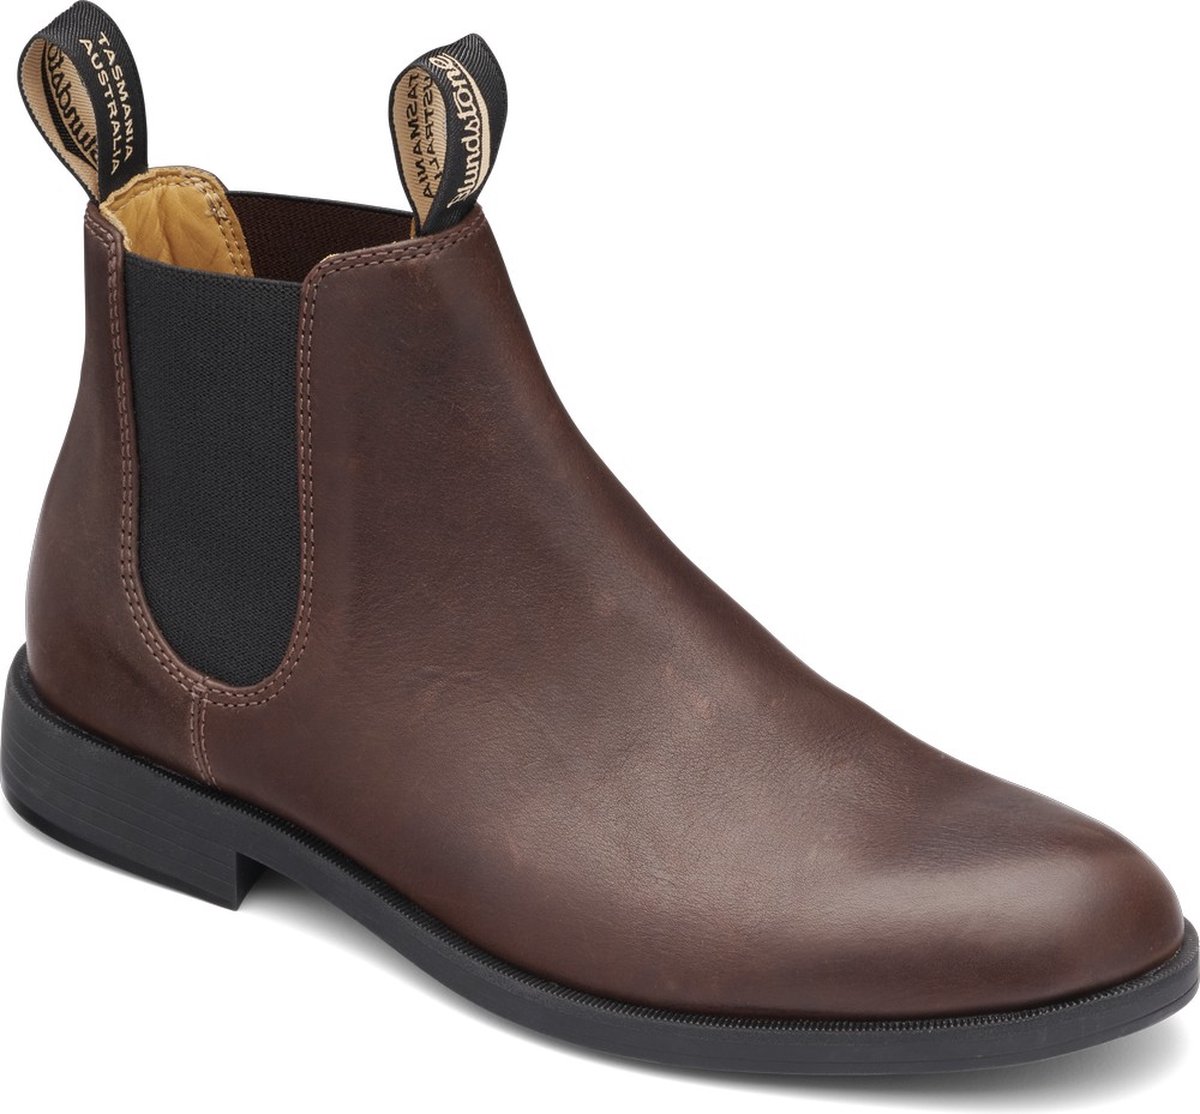 Blundstone Stiefel Boots #1900 Leather (Dress Series) Chestnut-8.5UK